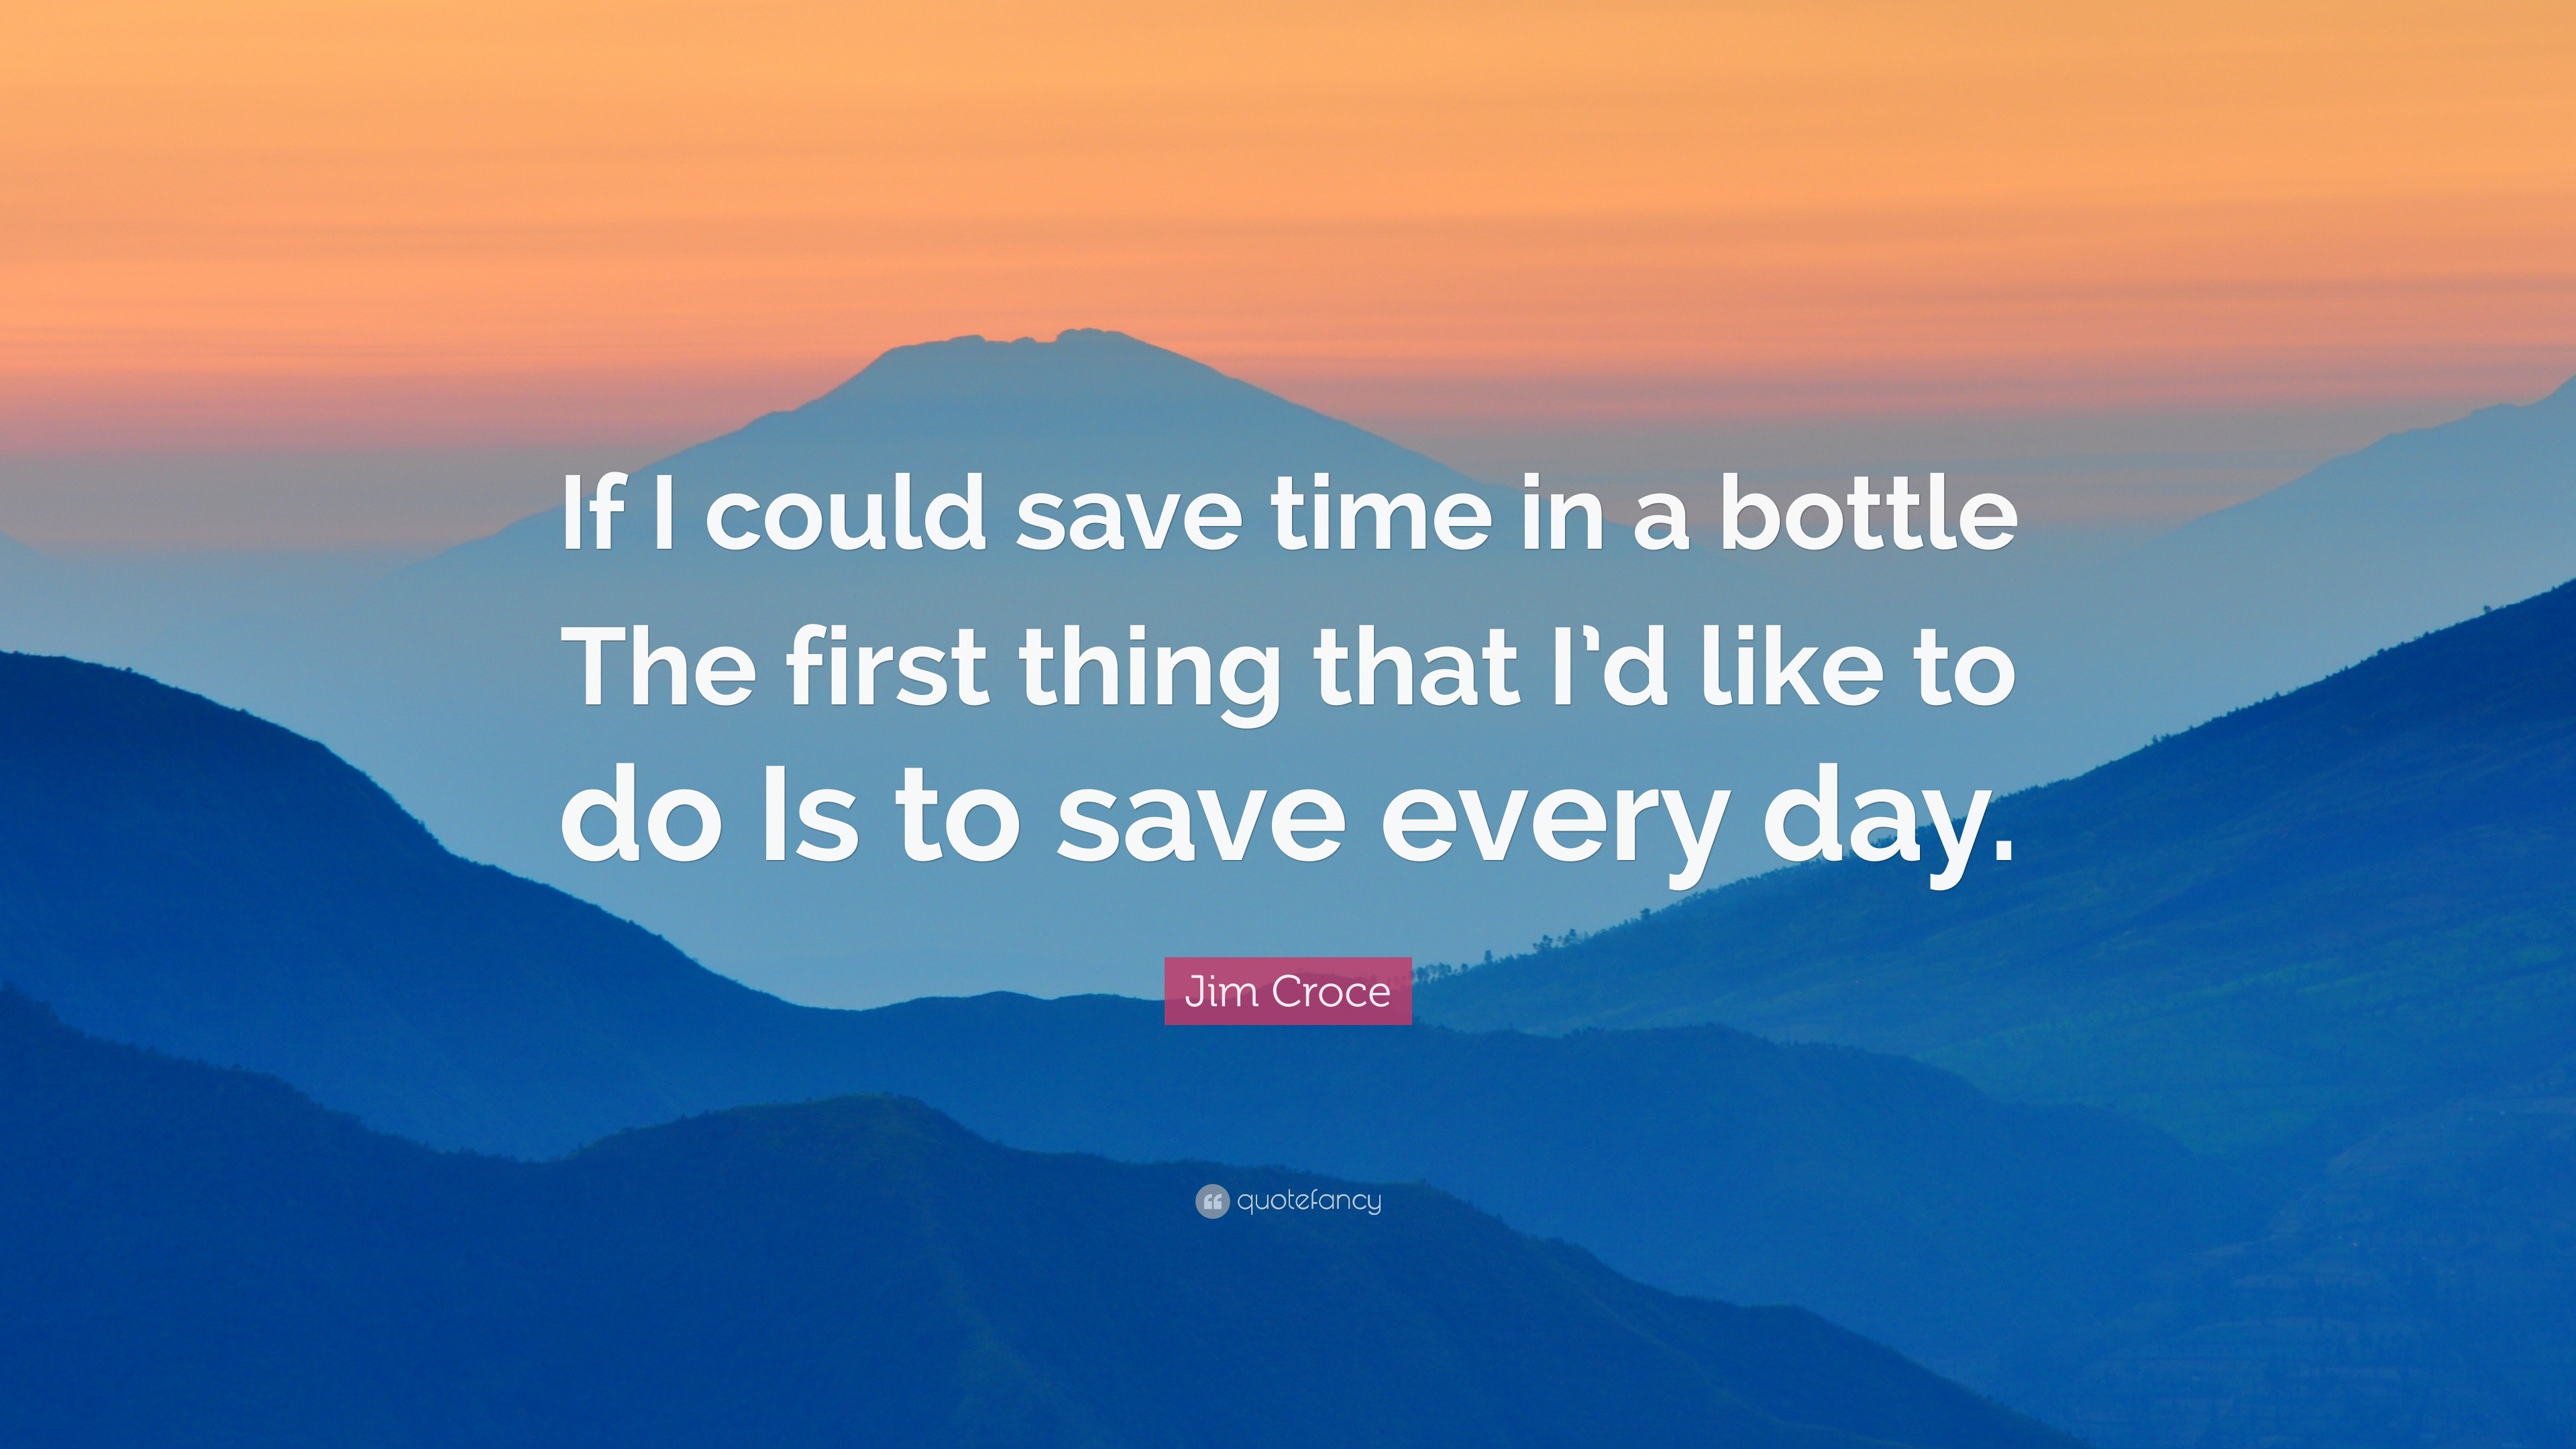 ketting Meerdere Dwars zitten Jim Croce Quote: “If I could save time in a bottle The first thing that I'